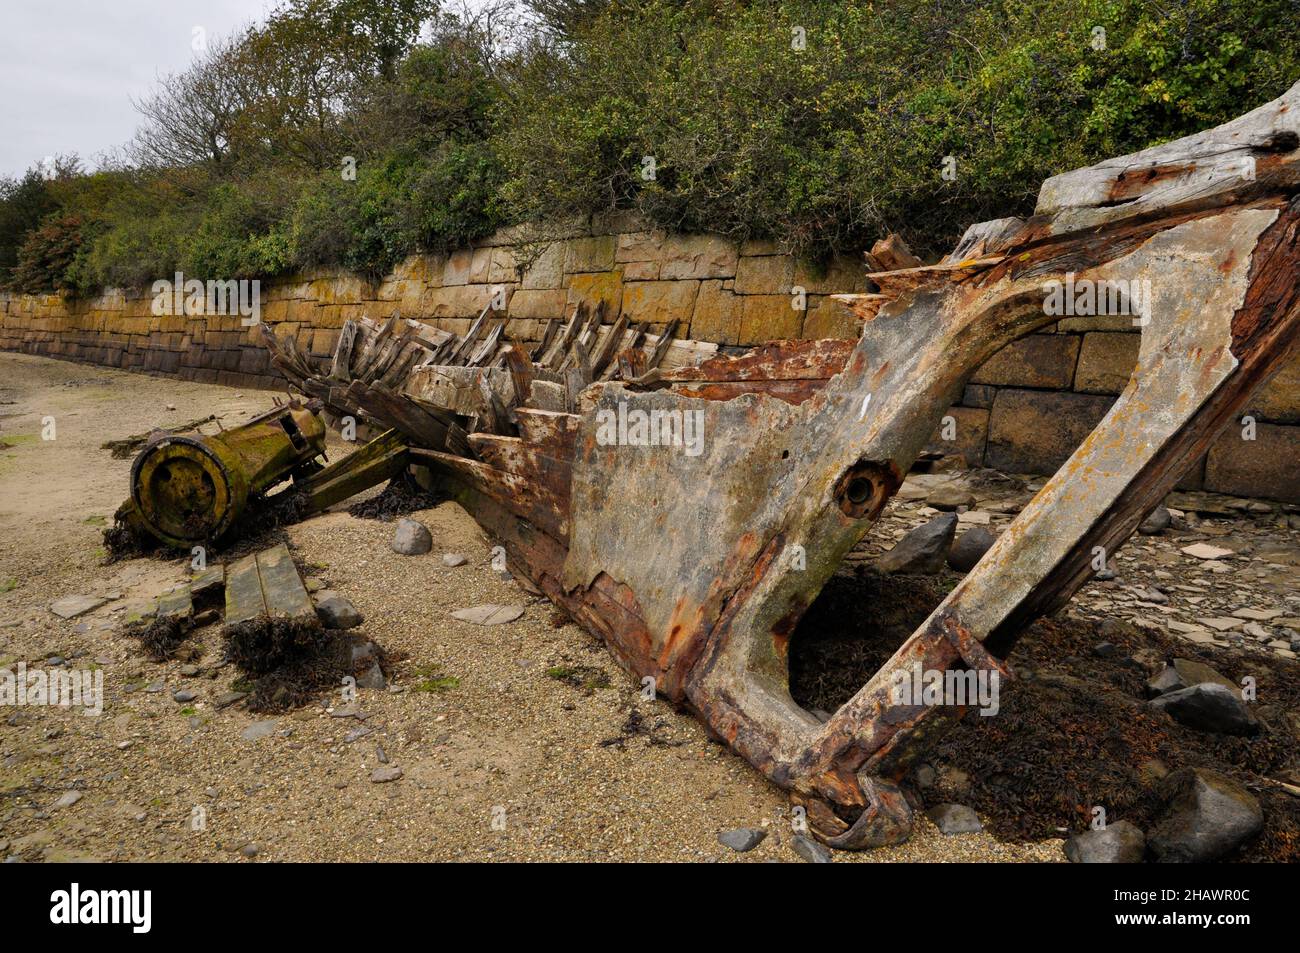 Remains of a wrecked wooden boat on the foreshore in the tidal estuary of the river Hayle nr St.Ives in Cornwall, UK Stock Photo